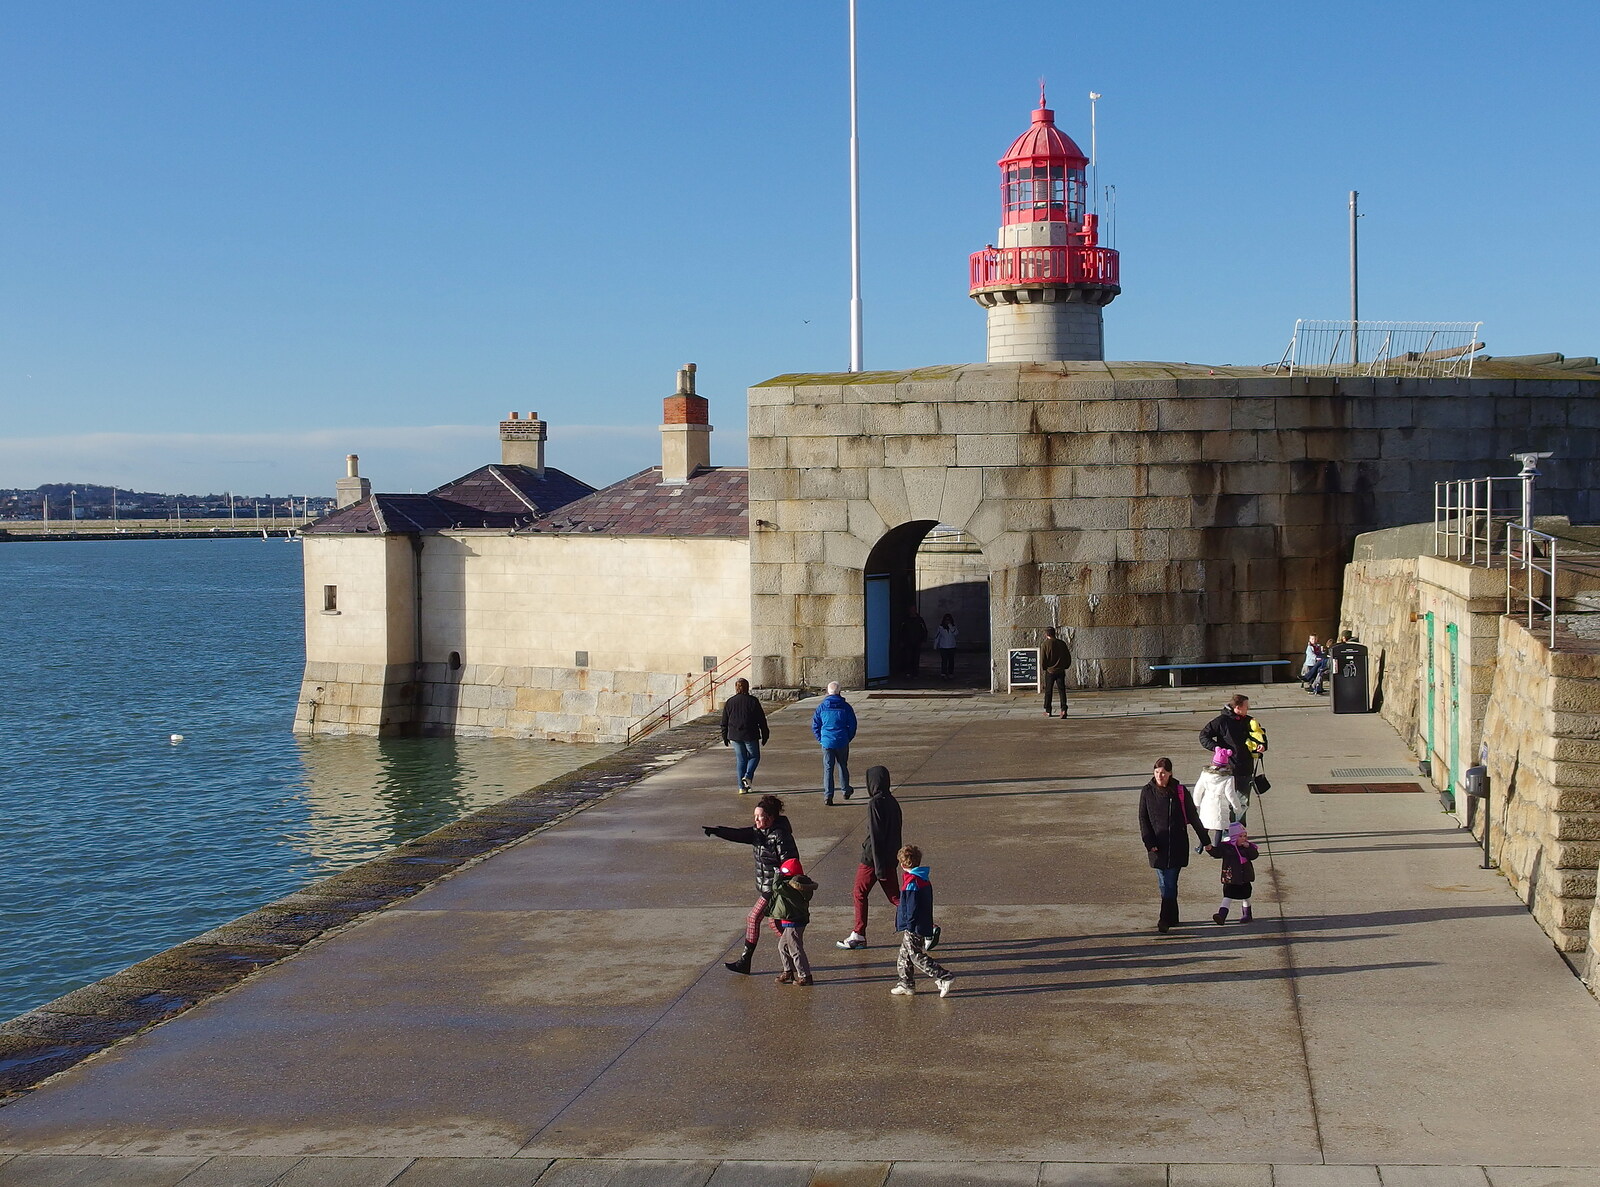 Evelyn points out to sea at the end of the pier from Dun Laoghaire and an Electrical Disaster, Monkstown, County Dublin, Ireland - 4th January 2014